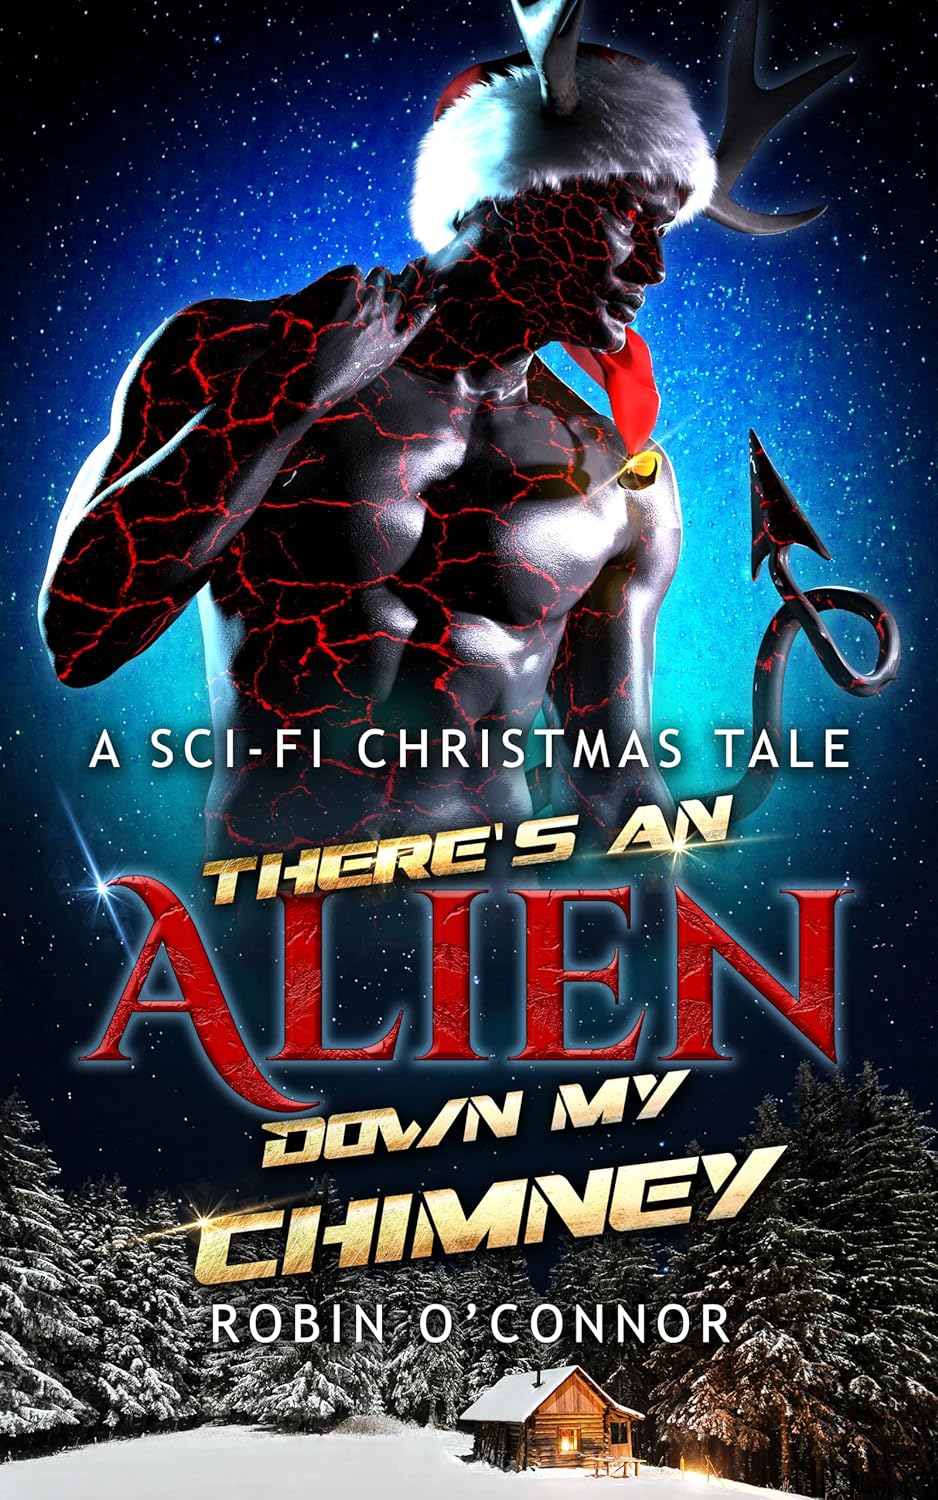 There’s an Alien Down My Chimney by Robin O’Connor